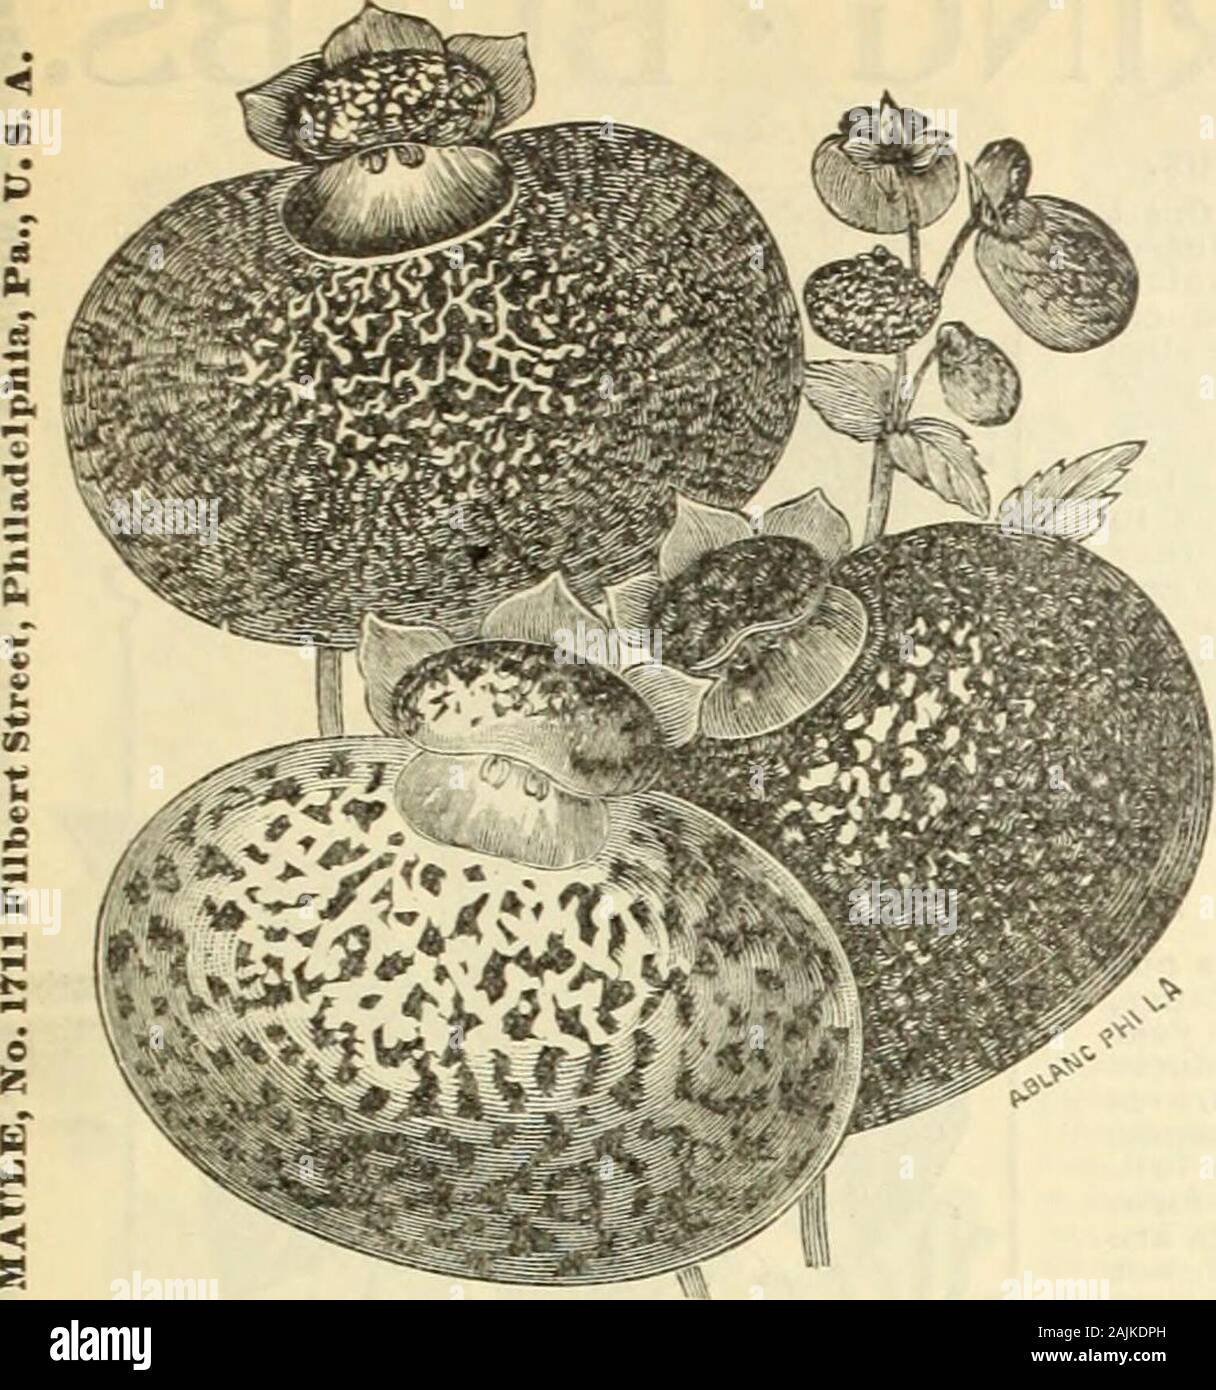 Maule's seed catalogue : 1896 . COE.EA SCANDENS. LOPHOSPEBMTTM—SCANDENS.. CALCEOLARIA HVBRIDA—FIKE MIXED, CAIiCEOLARIA.-Highly ornamental,both for conservatory and garden; pro-ducing a mass of beautiful pocket-like CHOICE 5ELECT 5EED5 FOR GREENHOUSE and WINDOW-CULTURE In the following list will be found seedsof plants taat are adapted to house-culture,and while it requires careful treatment togrow them successfully, it is an interest-ing study to watcb, day by-day, the devel-opment of these rare andbeautiful plants.ABUTIIiON.-CAtnese Bill Flower.Beautiful green-house shrubs of ftroiiggrowth, a Stock Photo